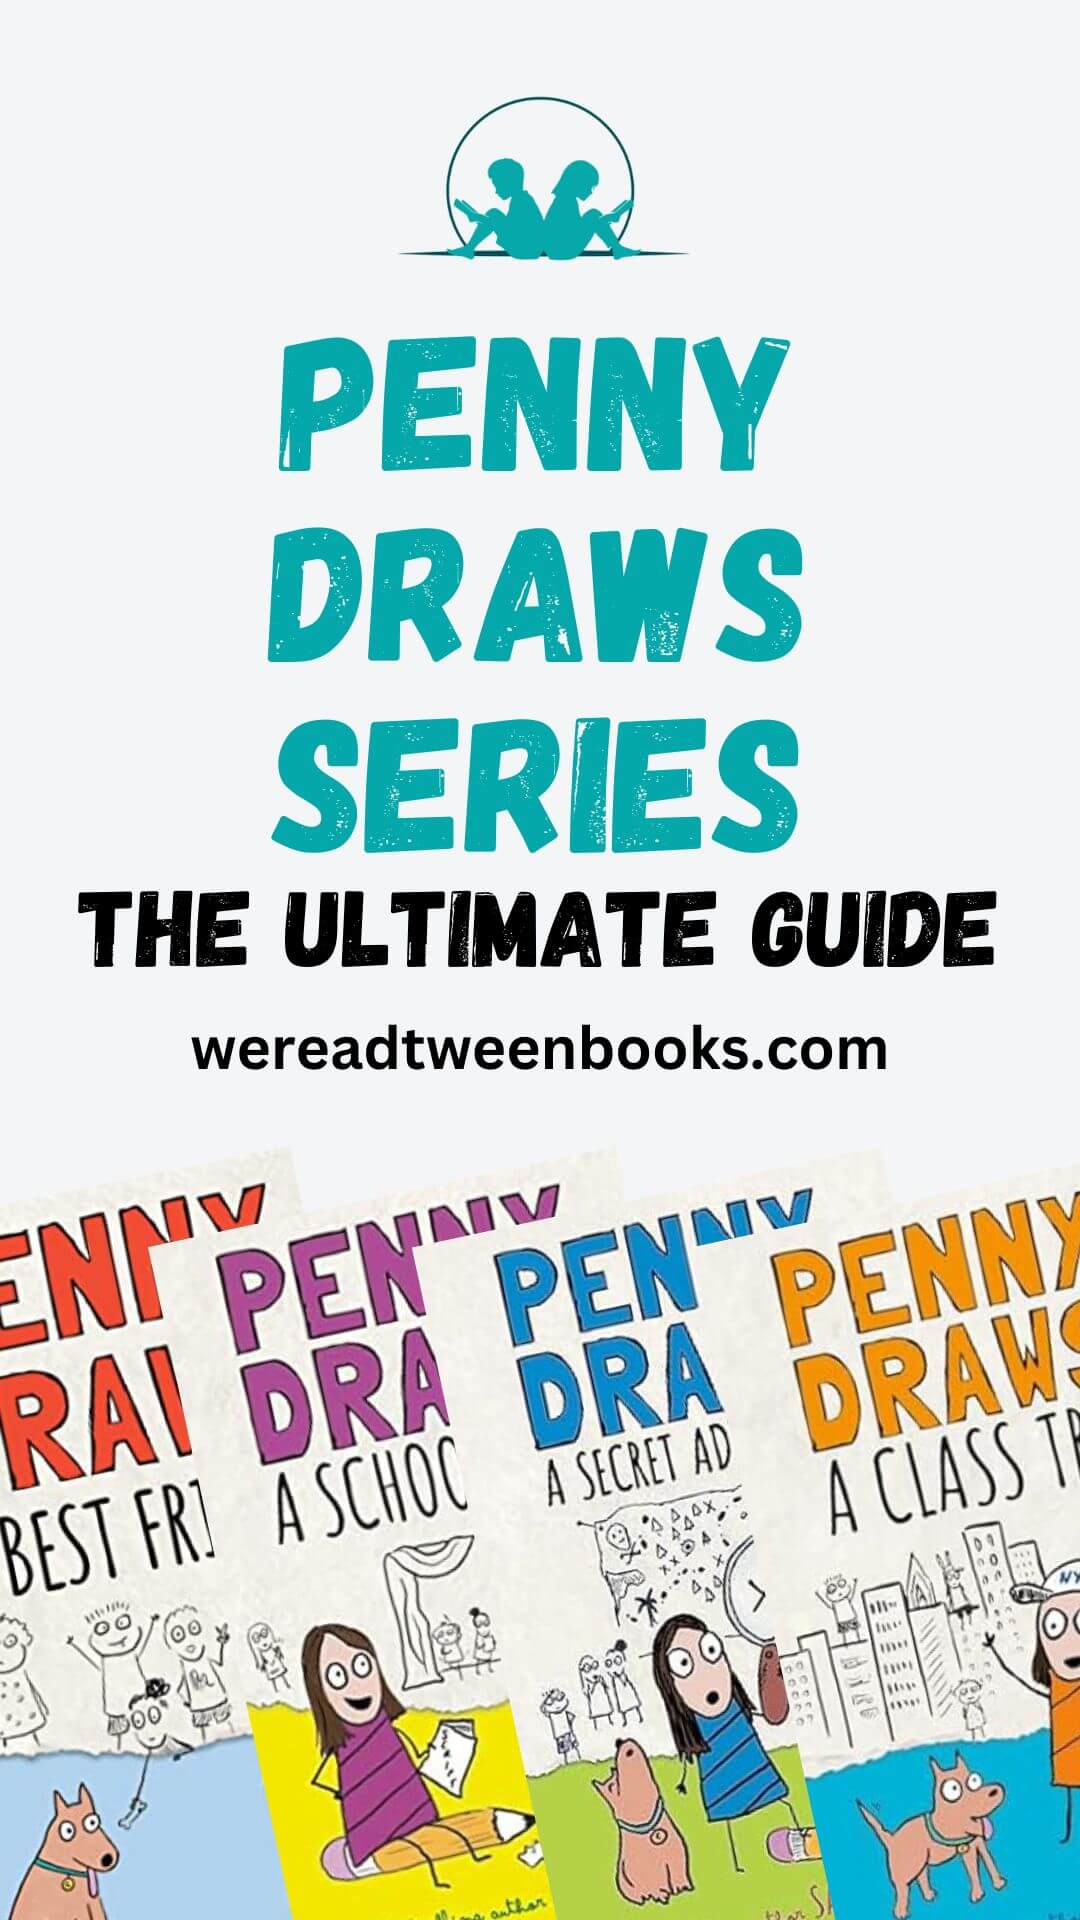 Check out the complete guide to Penny Draws series in order on We Read Tween Books if your tween reader loves illustrated chapter books.